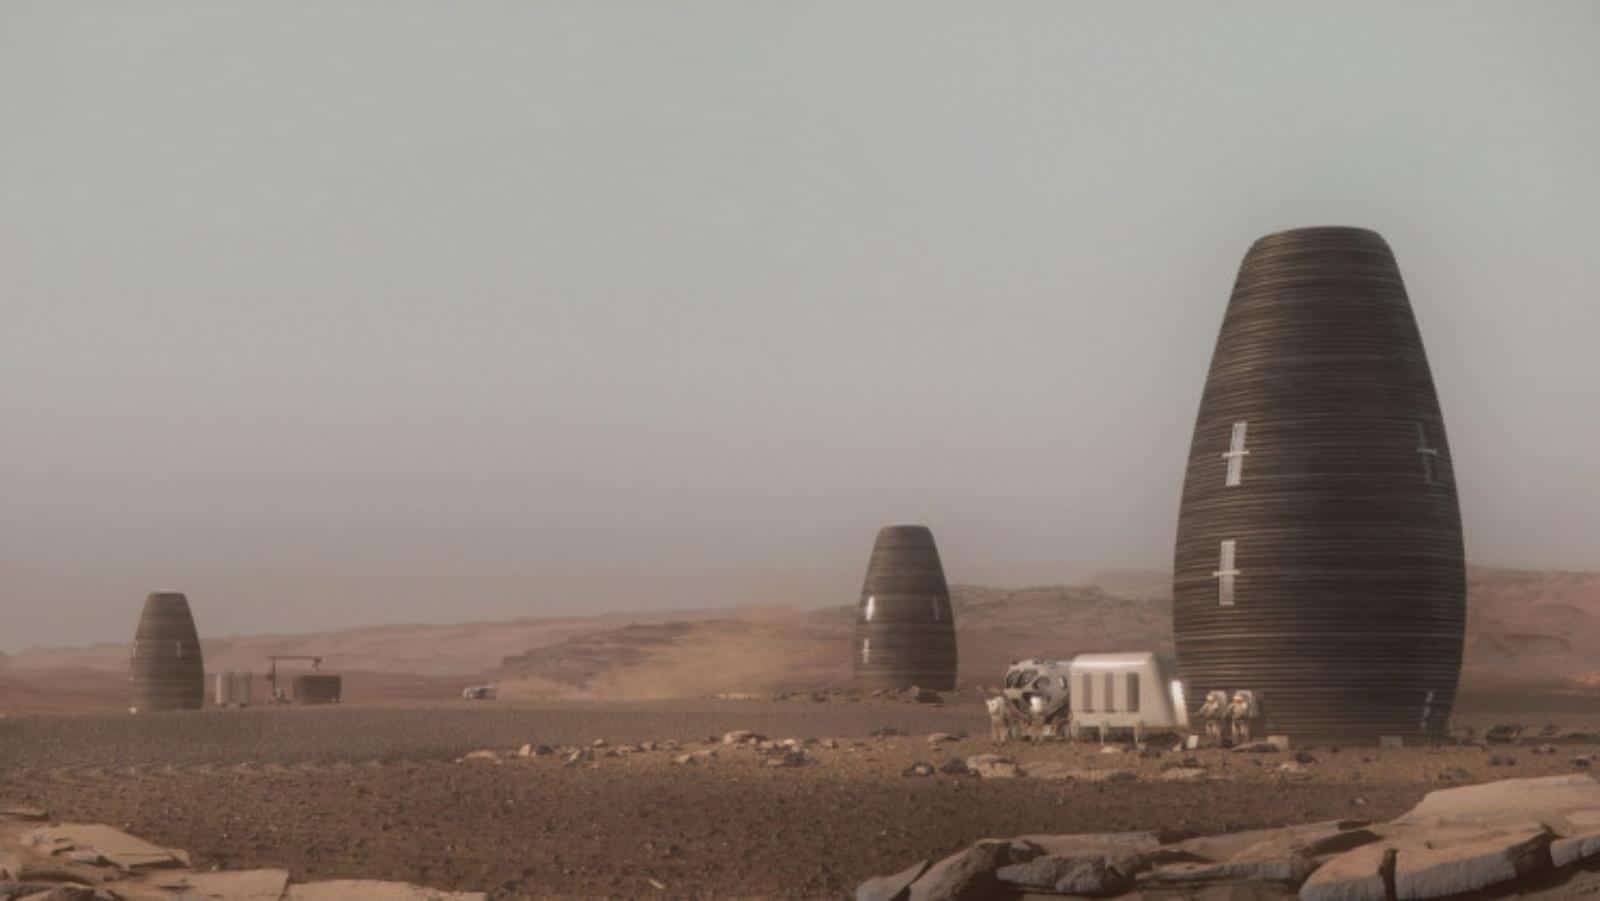 Would Marsh's Martian habitats be perfect here on Earth and made of plastic?